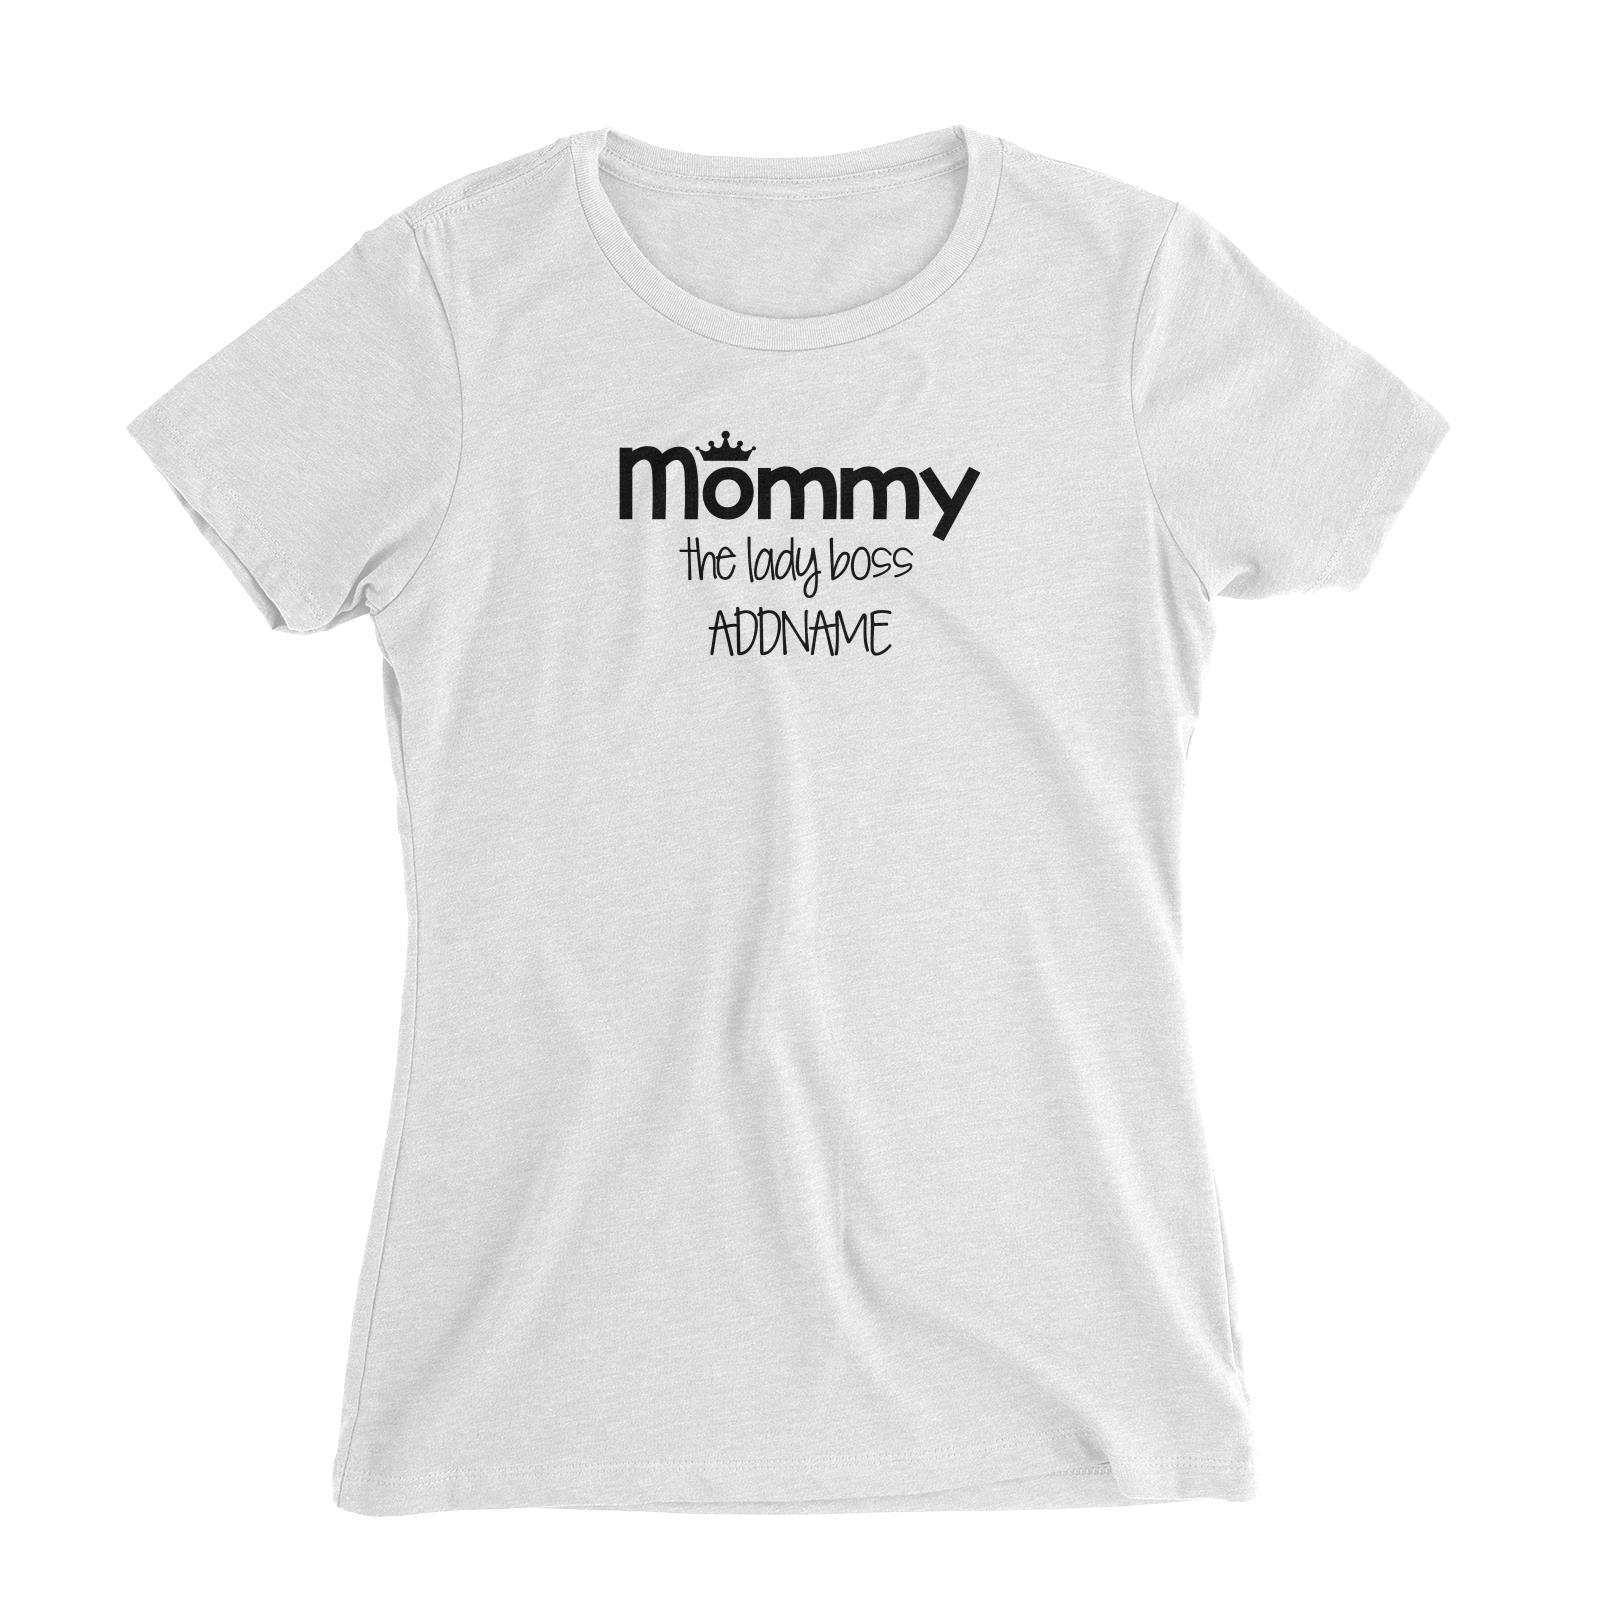 Mommy with Tiara The Lady Boss Women's Slim Fit T-Shirt